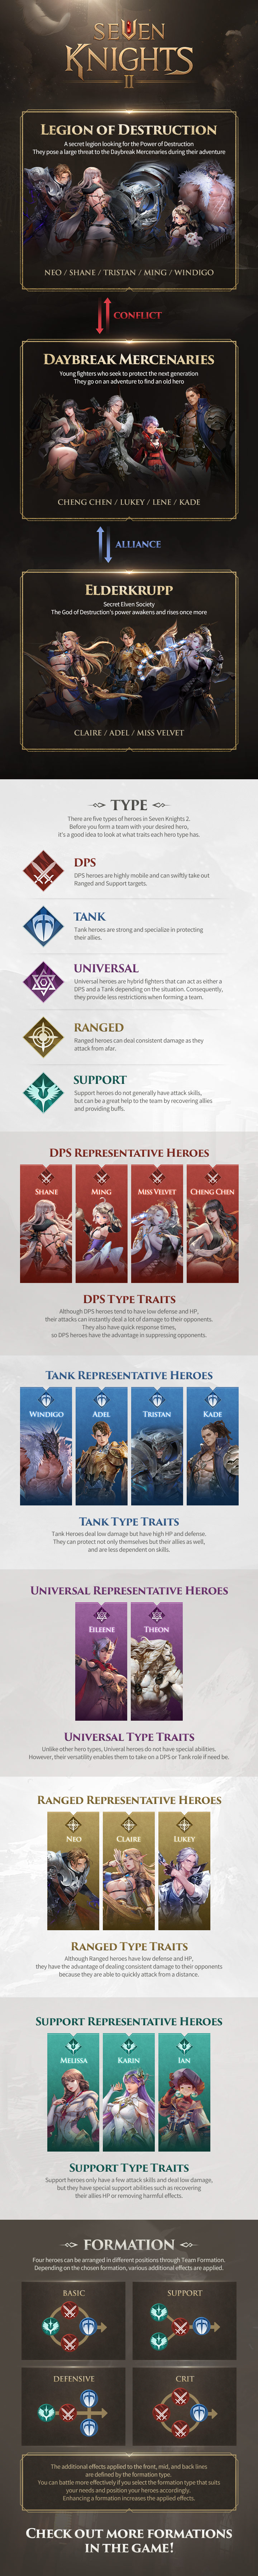 Seven Knights 2: Hero Types and Relationships